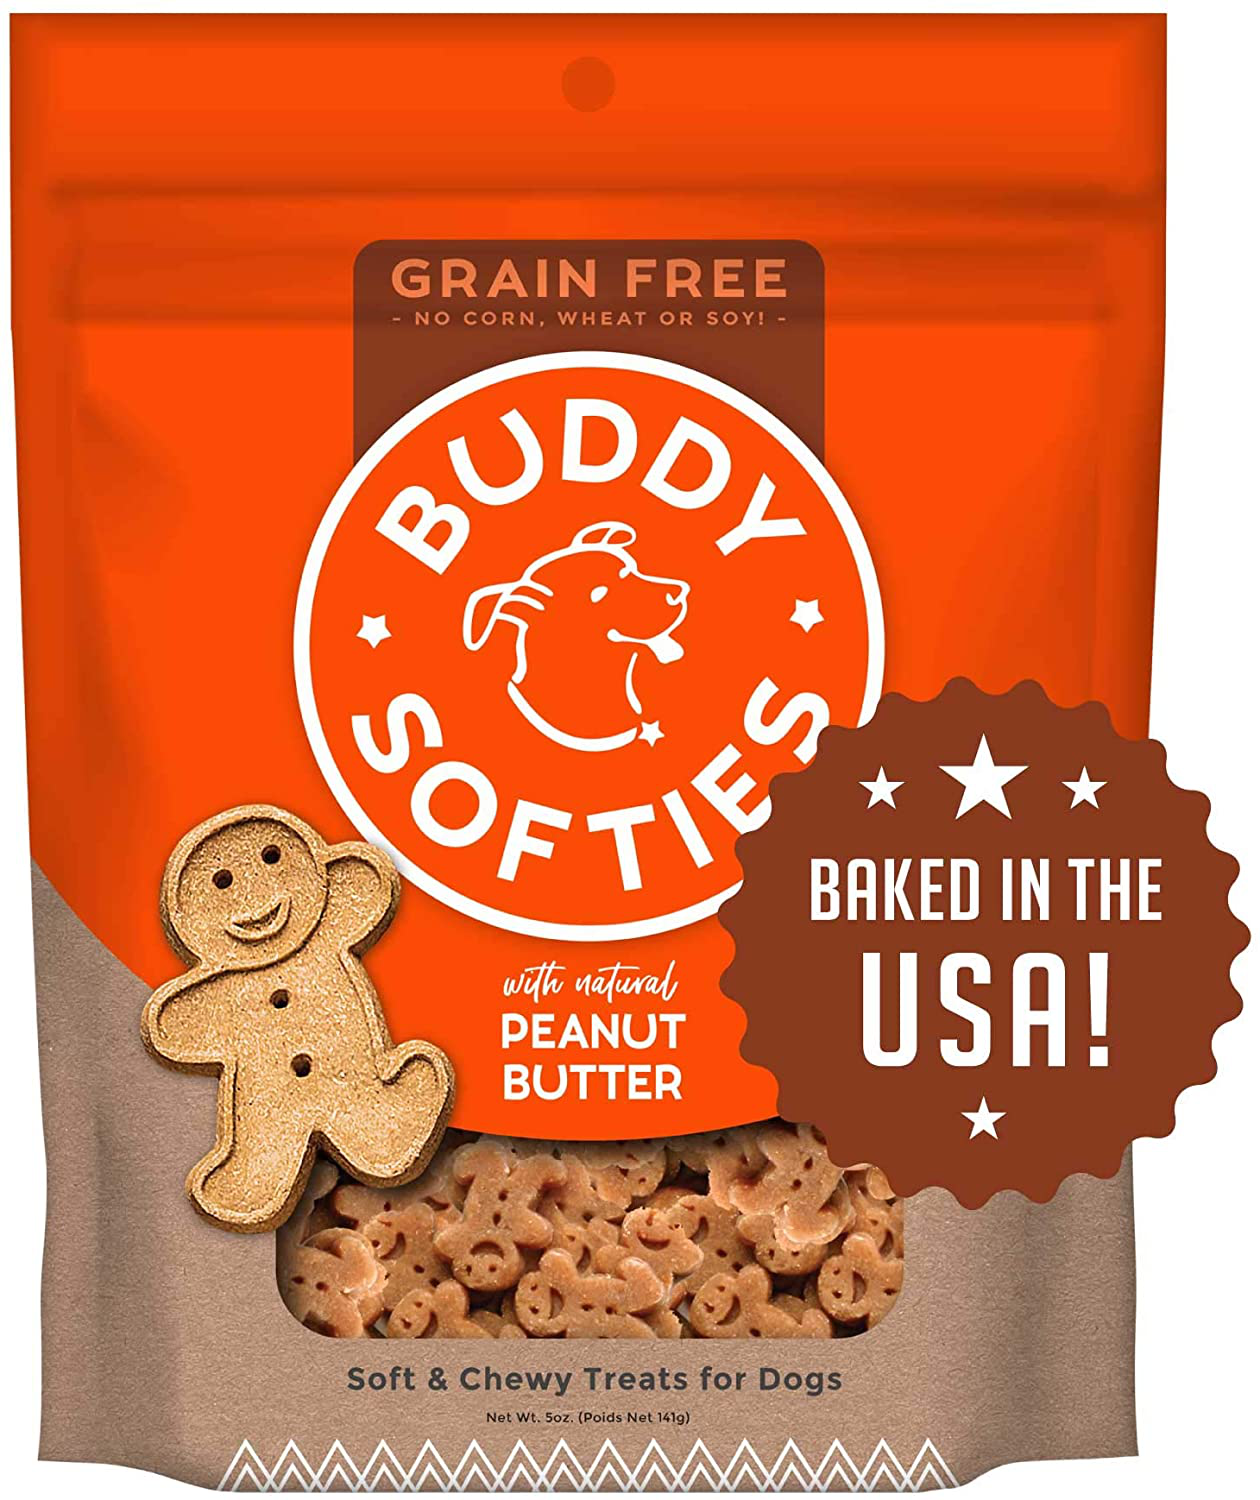 Buddy Biscuits Grain Free Dog Treats, Made in the USA Only, Healthy Ingredients No Wheat Corn or Soy